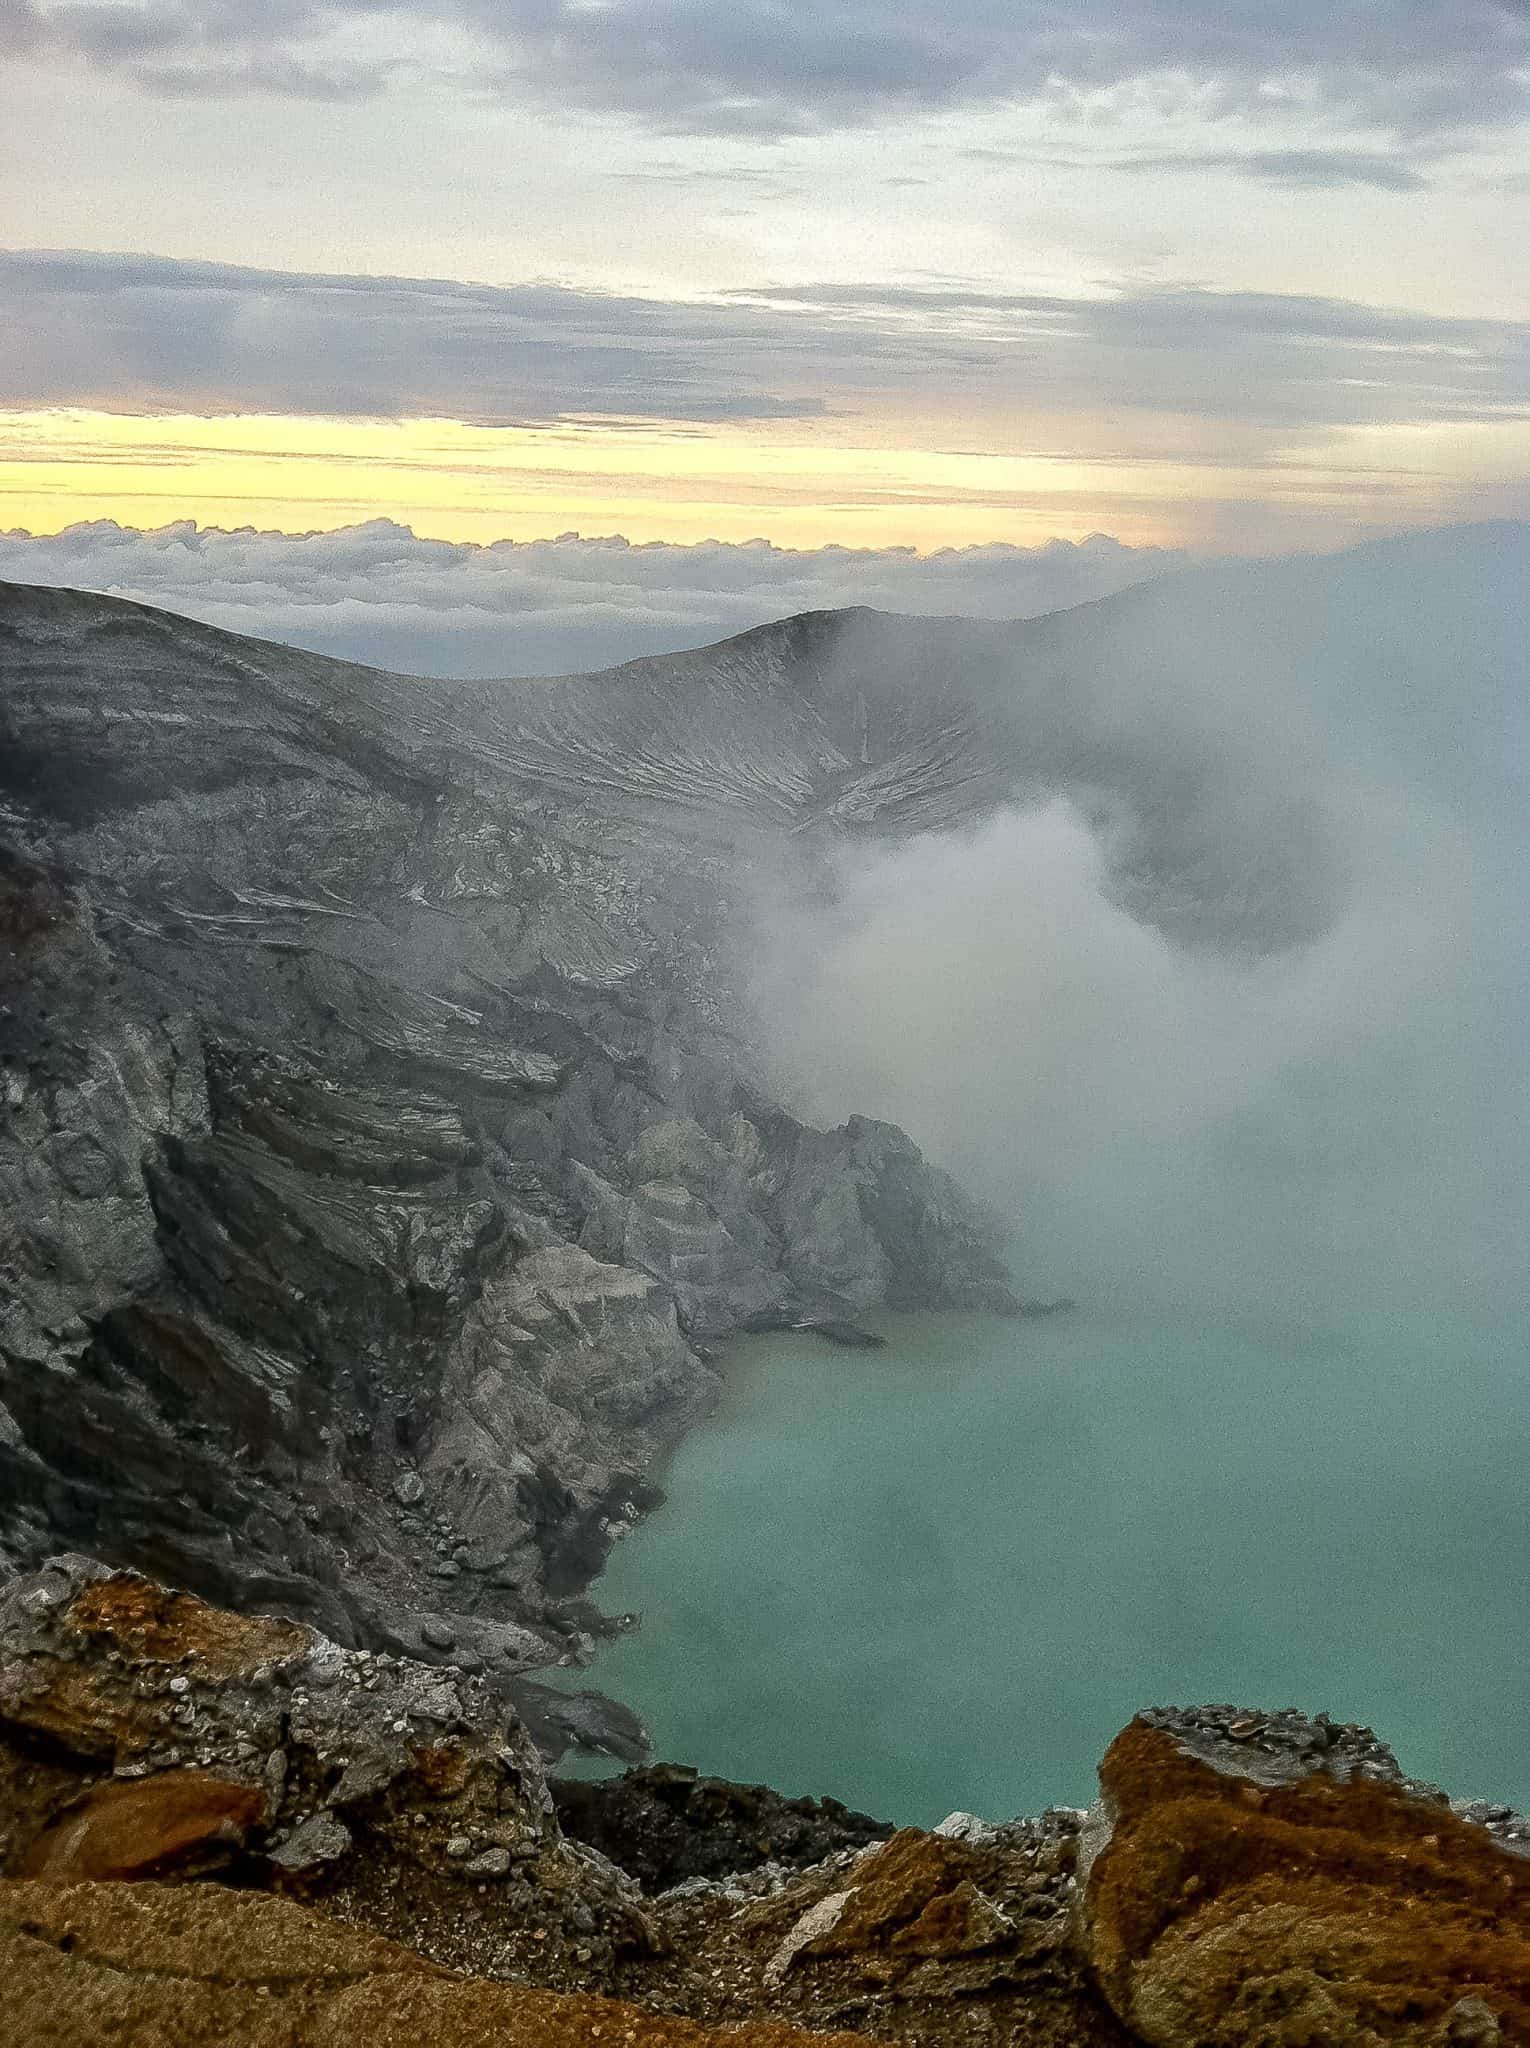 Going on kawah ijen tour is one of my favourite thing to do